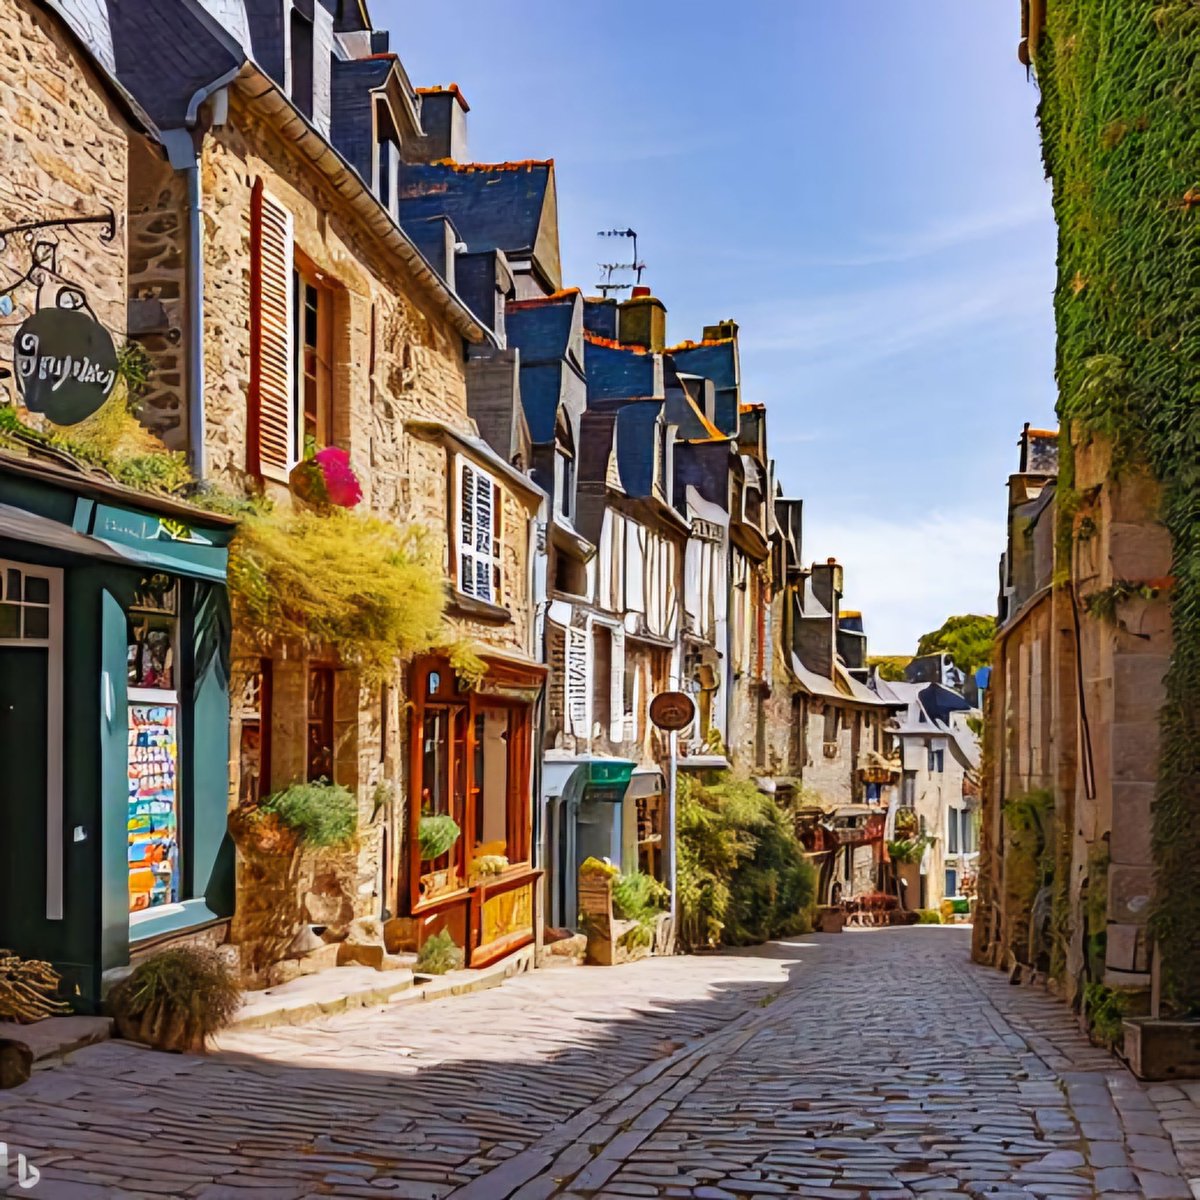 A street in the town of #Dinan in #Brittany 

#France 🇨🇵 #travel #photo